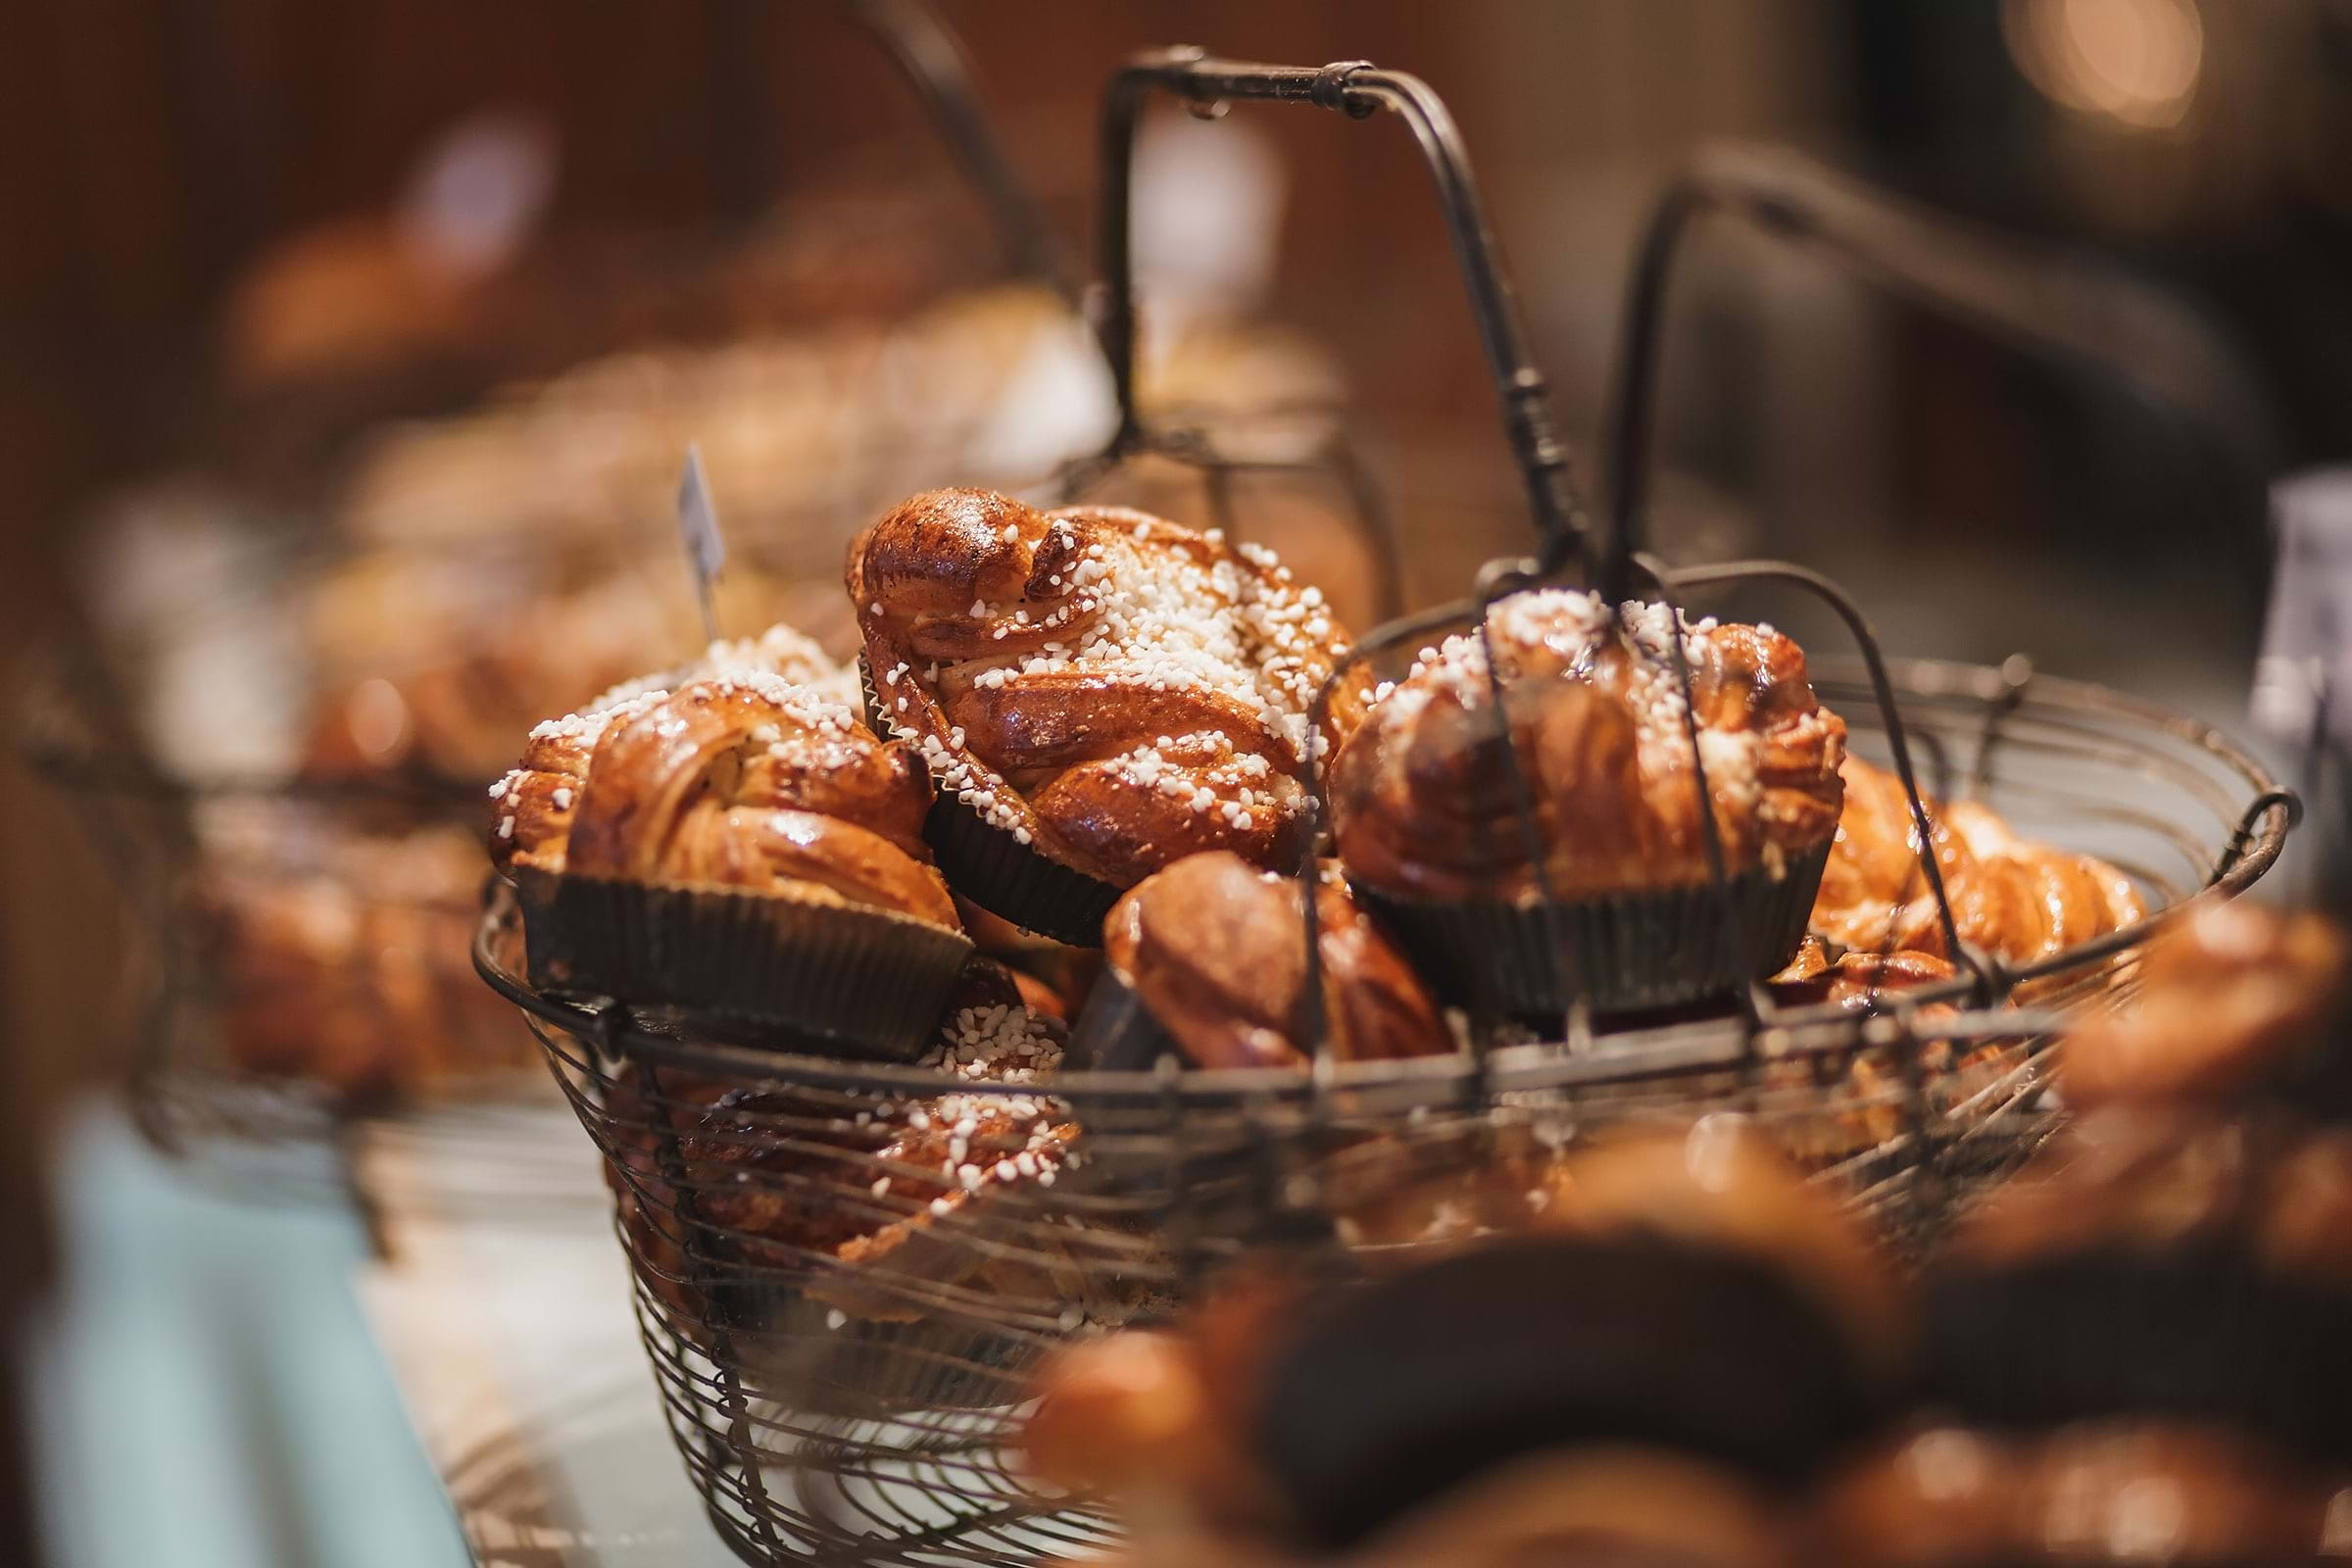 Guide to gluten-free bakeries in London